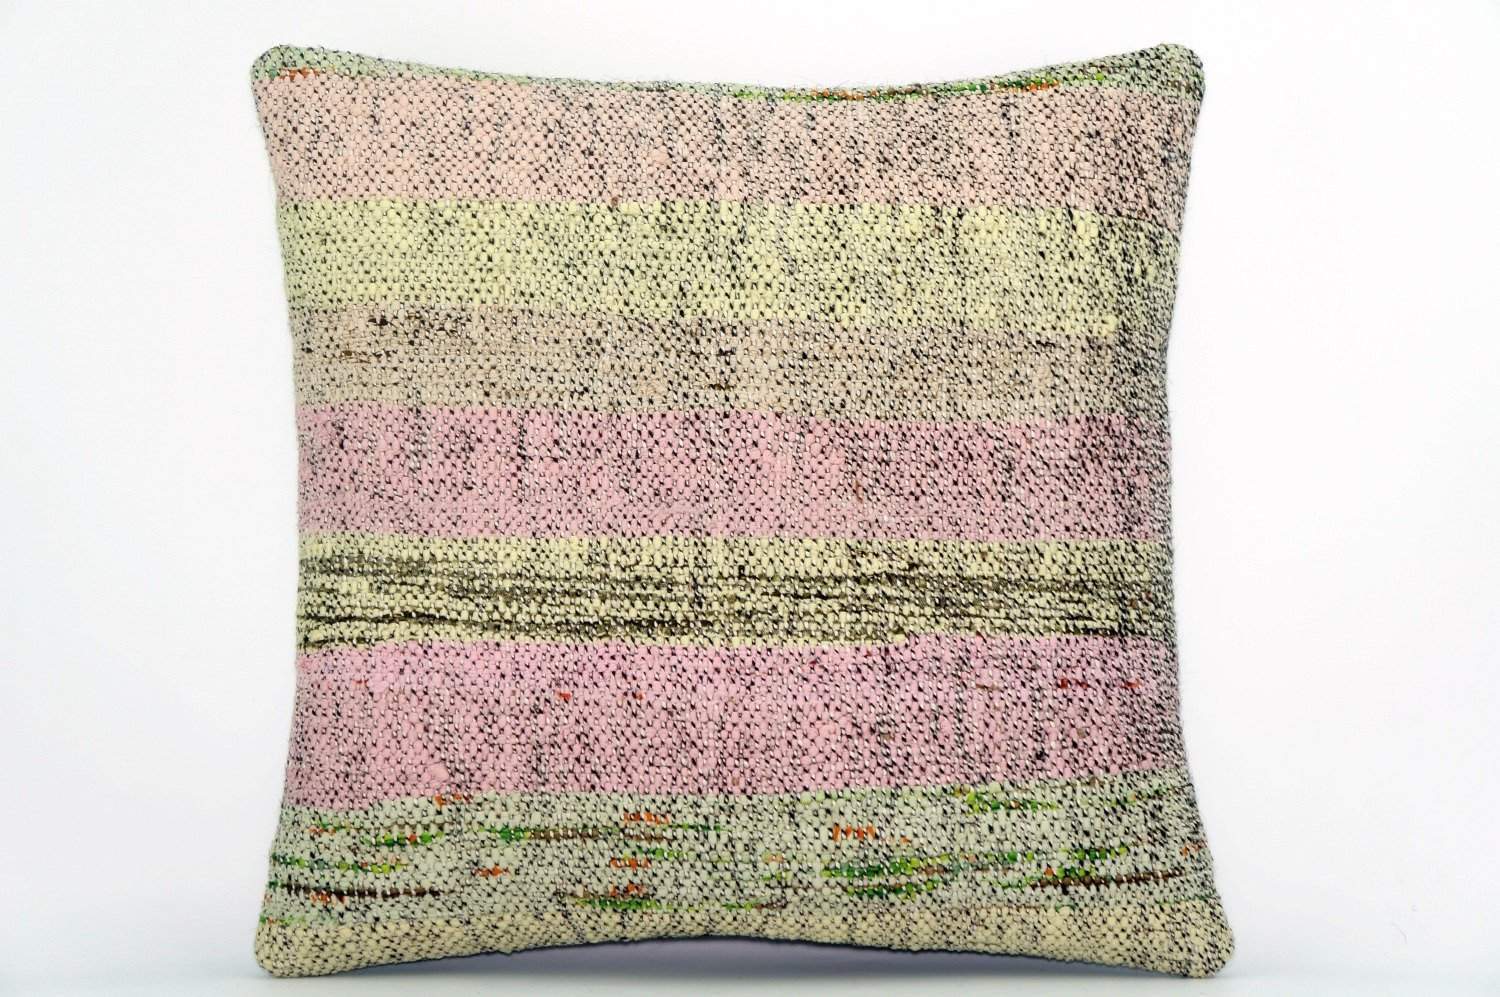 CLEARANCE Handwoven hemp pillow green pink yellow , Decorative Kilim pillow cover  1574_A - kilimpillowstore
 - 1